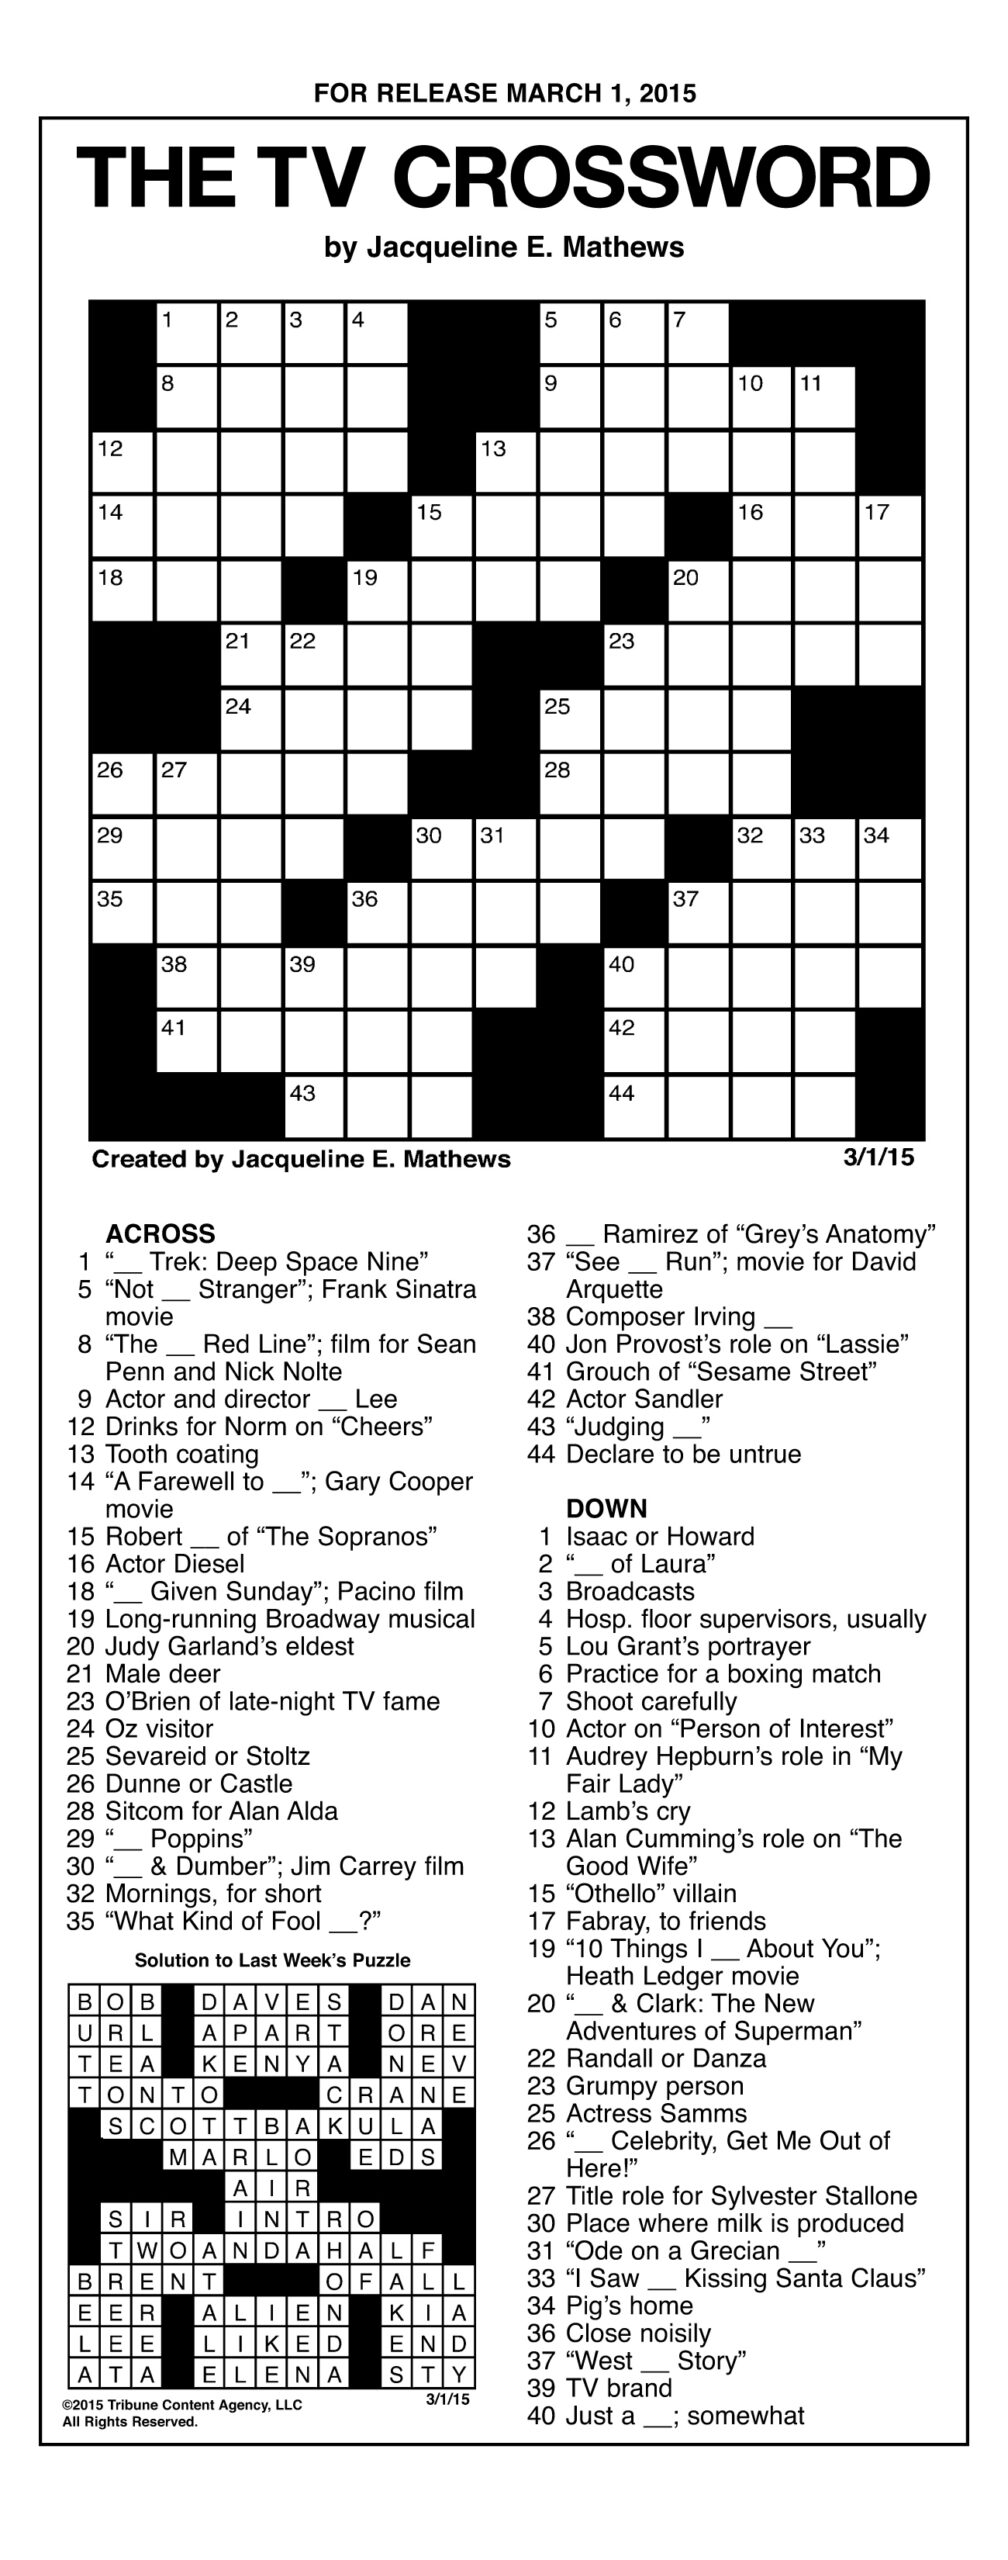 Sample Of The TV Crossword Tribune Content Agency March 1 2015 